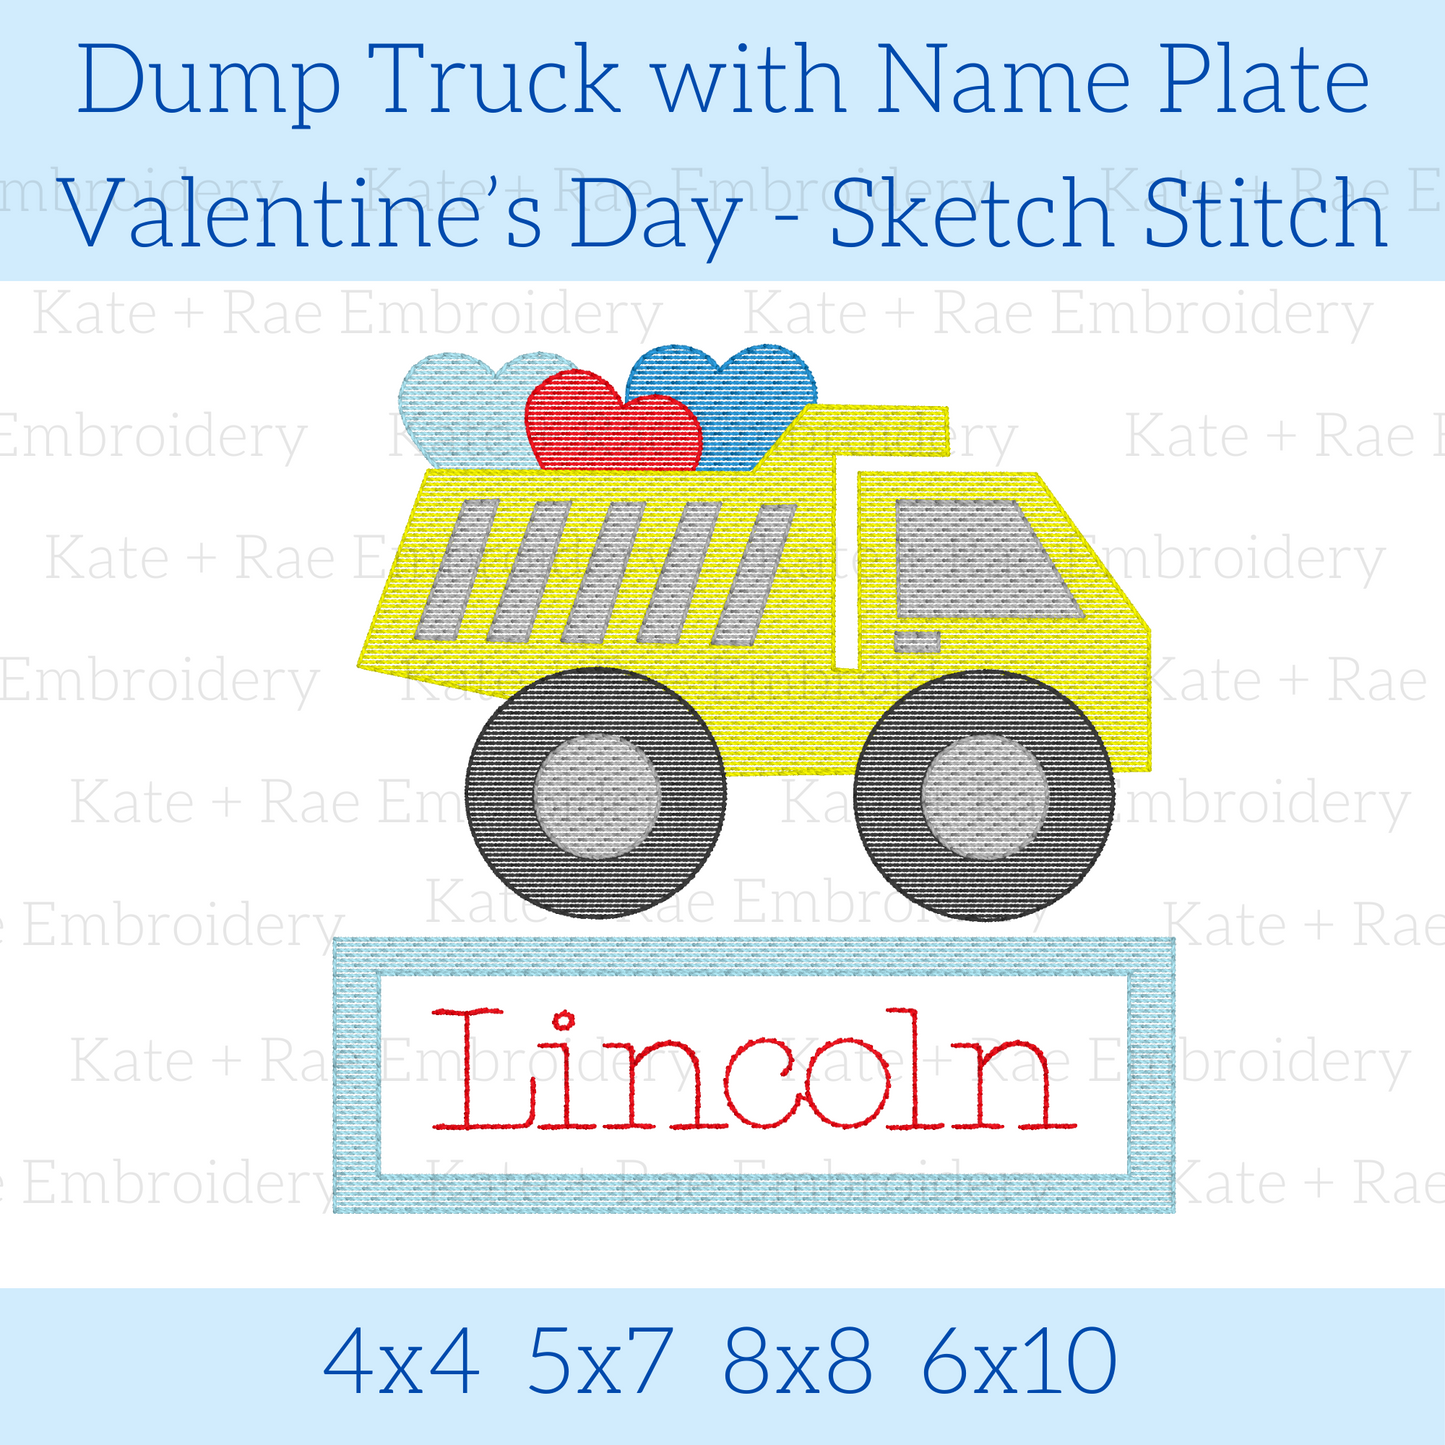 Dump Truck with Name Plate Valentine's Day Sketch Stitch Embroidery Design